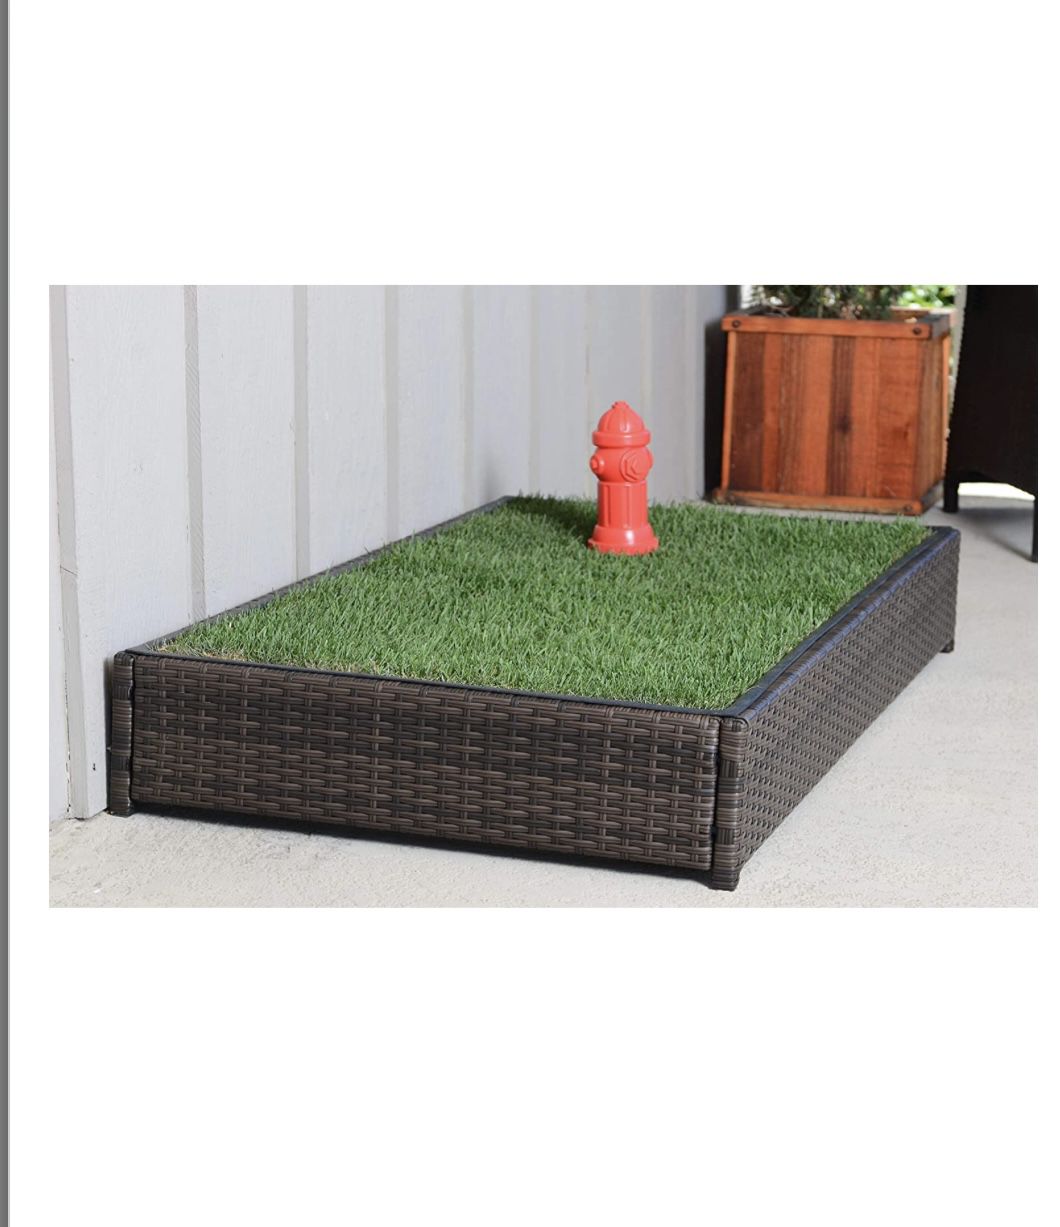 Porch Potty Standard Without Sprinklers, Outer Dimensions 26" x 50" x 7", Grass Area 8 Square Feet (4' x 2